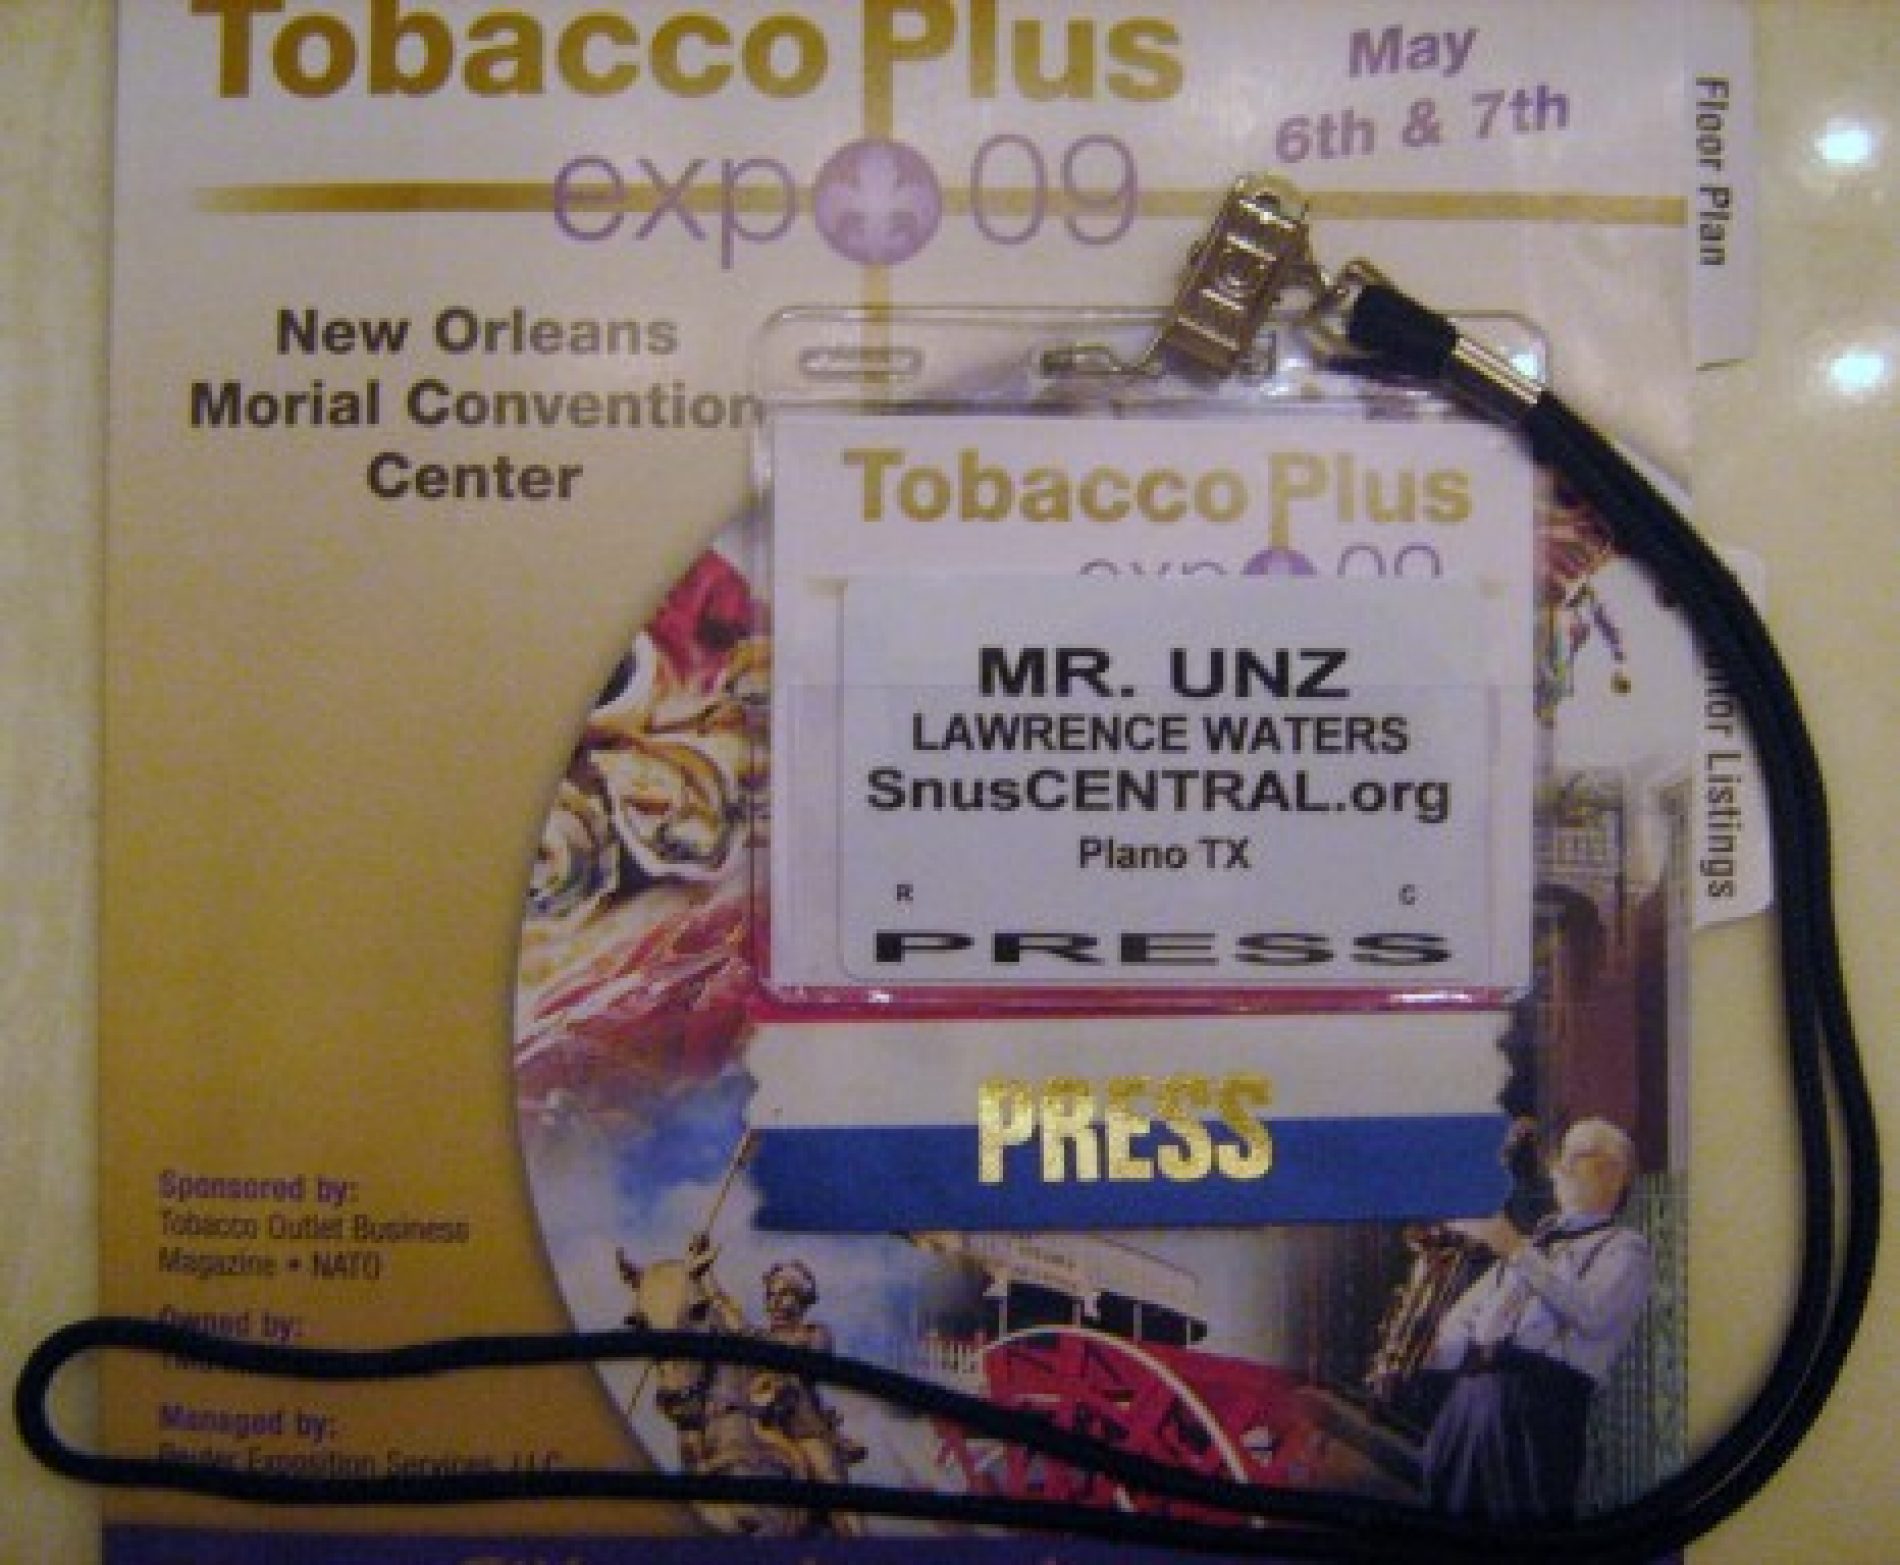 Report from Tobacco Plus Expo 2009!